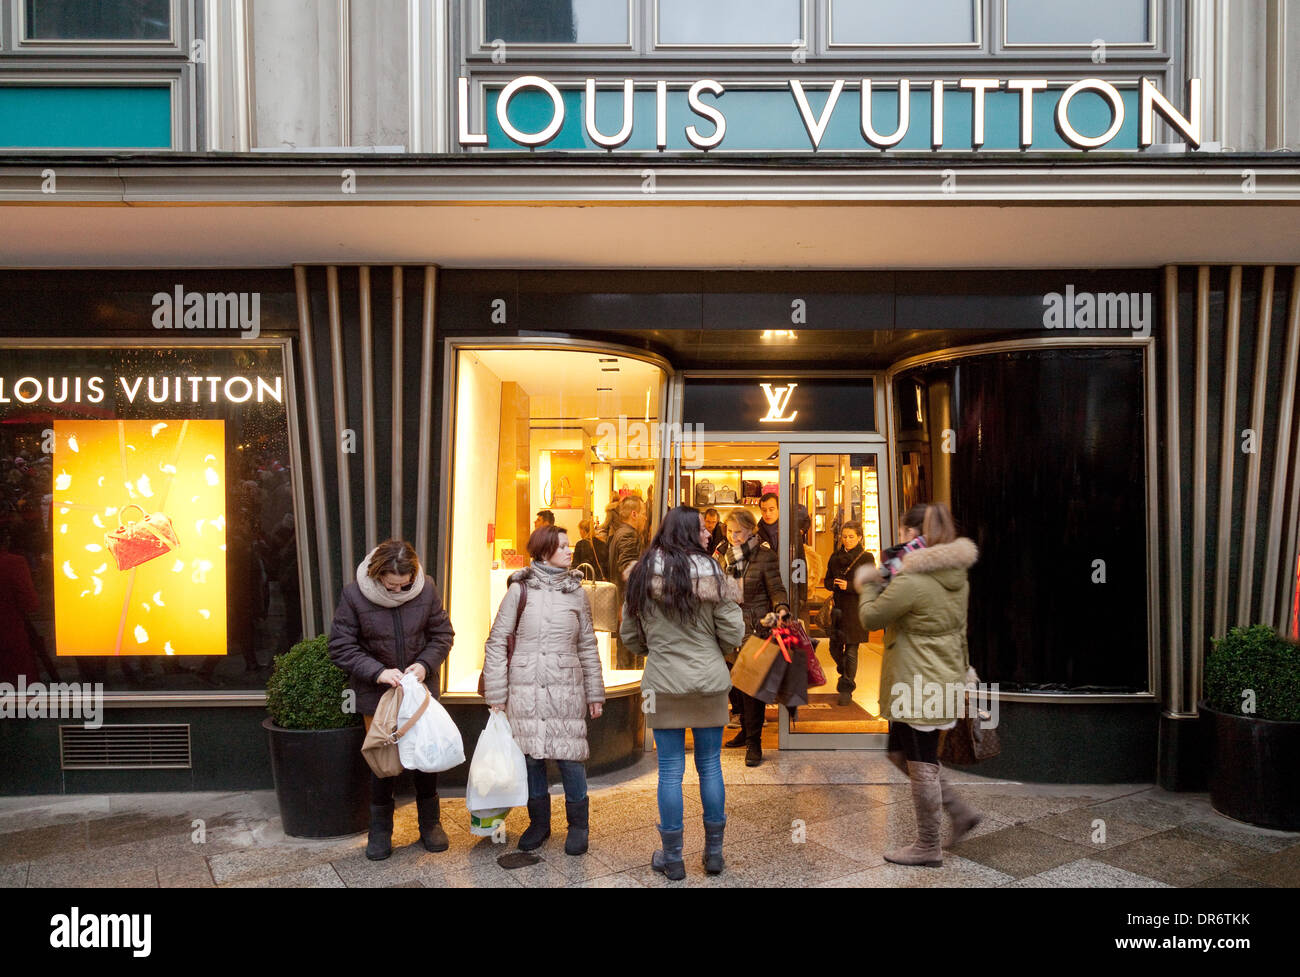 Louis Vuitton fashion store, Cologne, Germany Europe Stock Photo